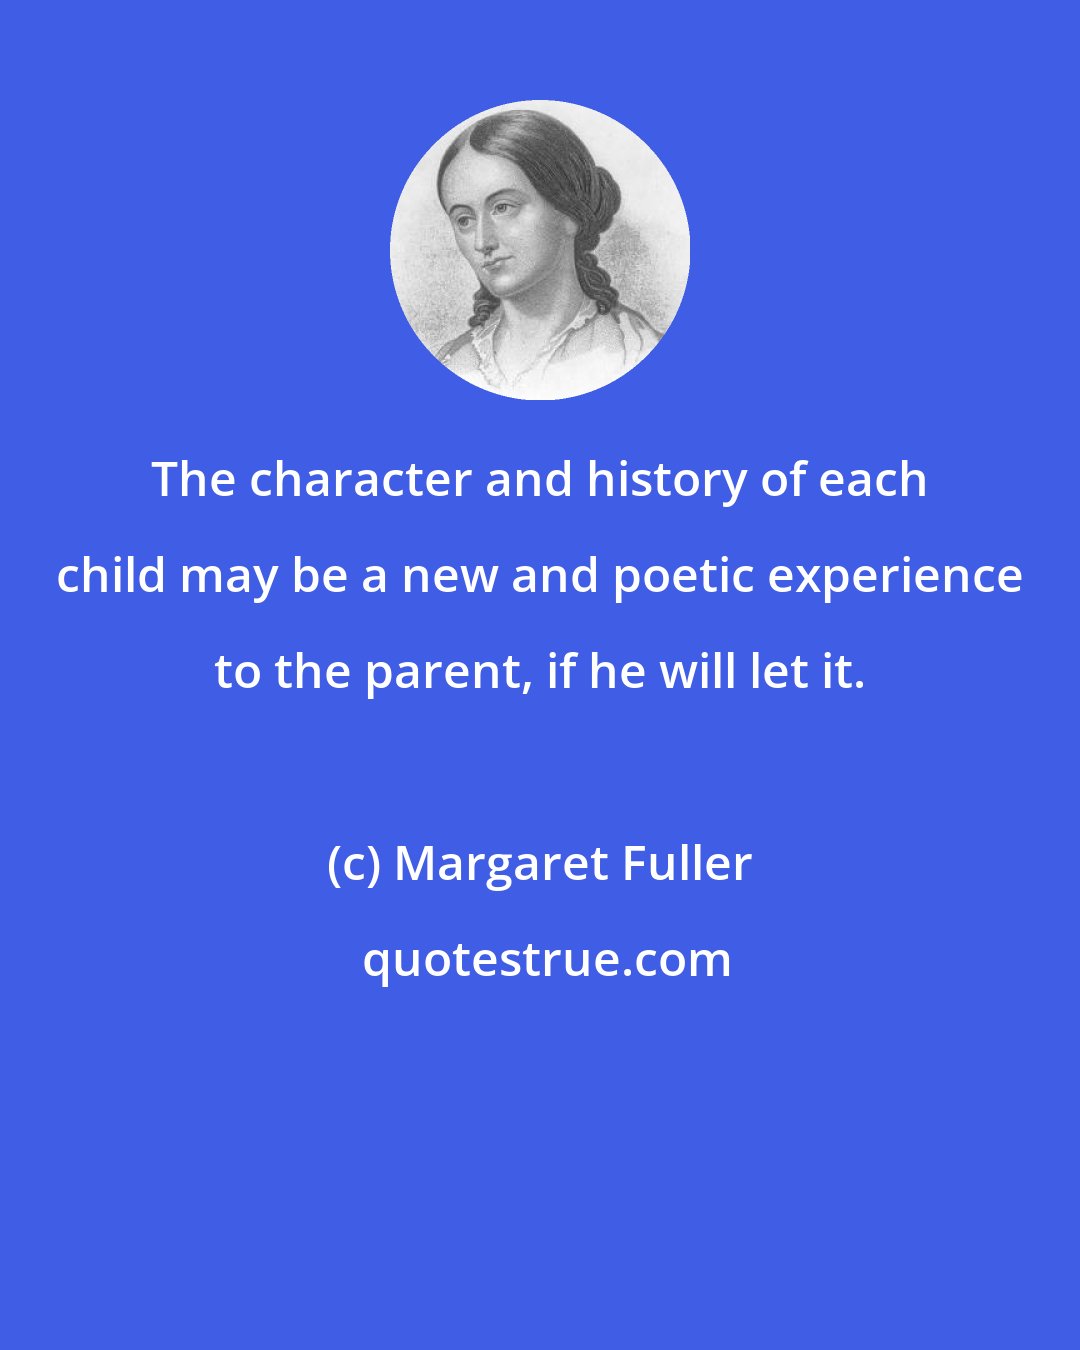 Margaret Fuller: The character and history of each child may be a new and poetic experience to the parent, if he will let it.